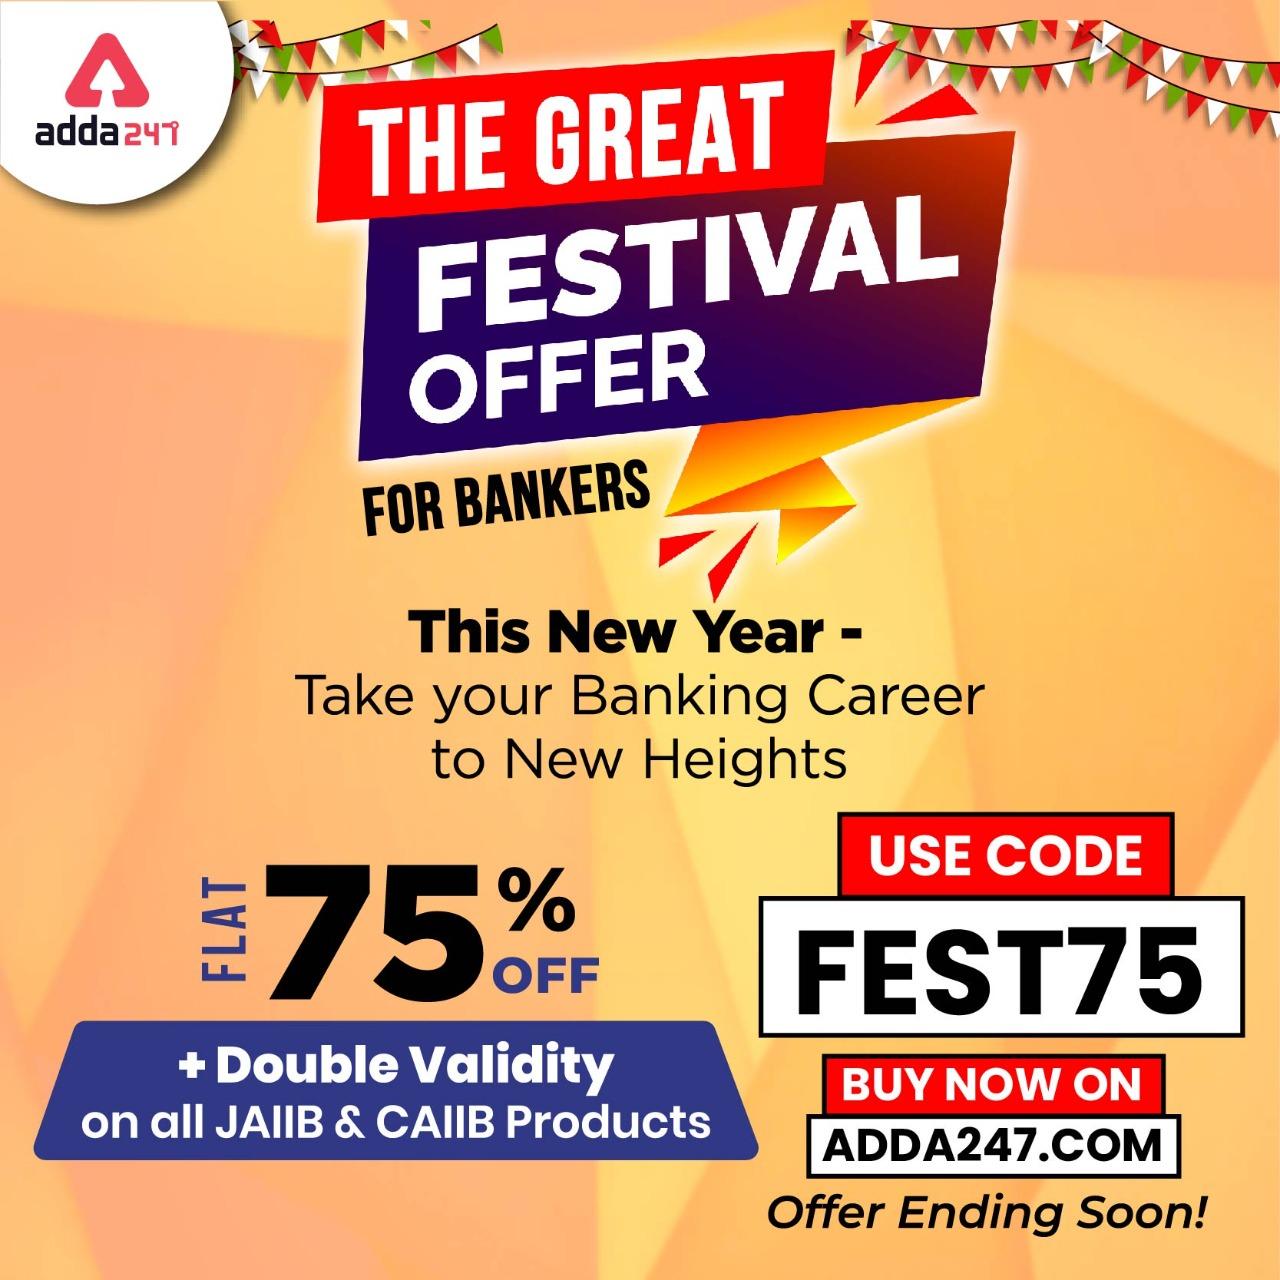 Great Festival Offer for Bankers: Flat 75% Off + Double Validity on All JAIIB/CAIIB Products_40.1